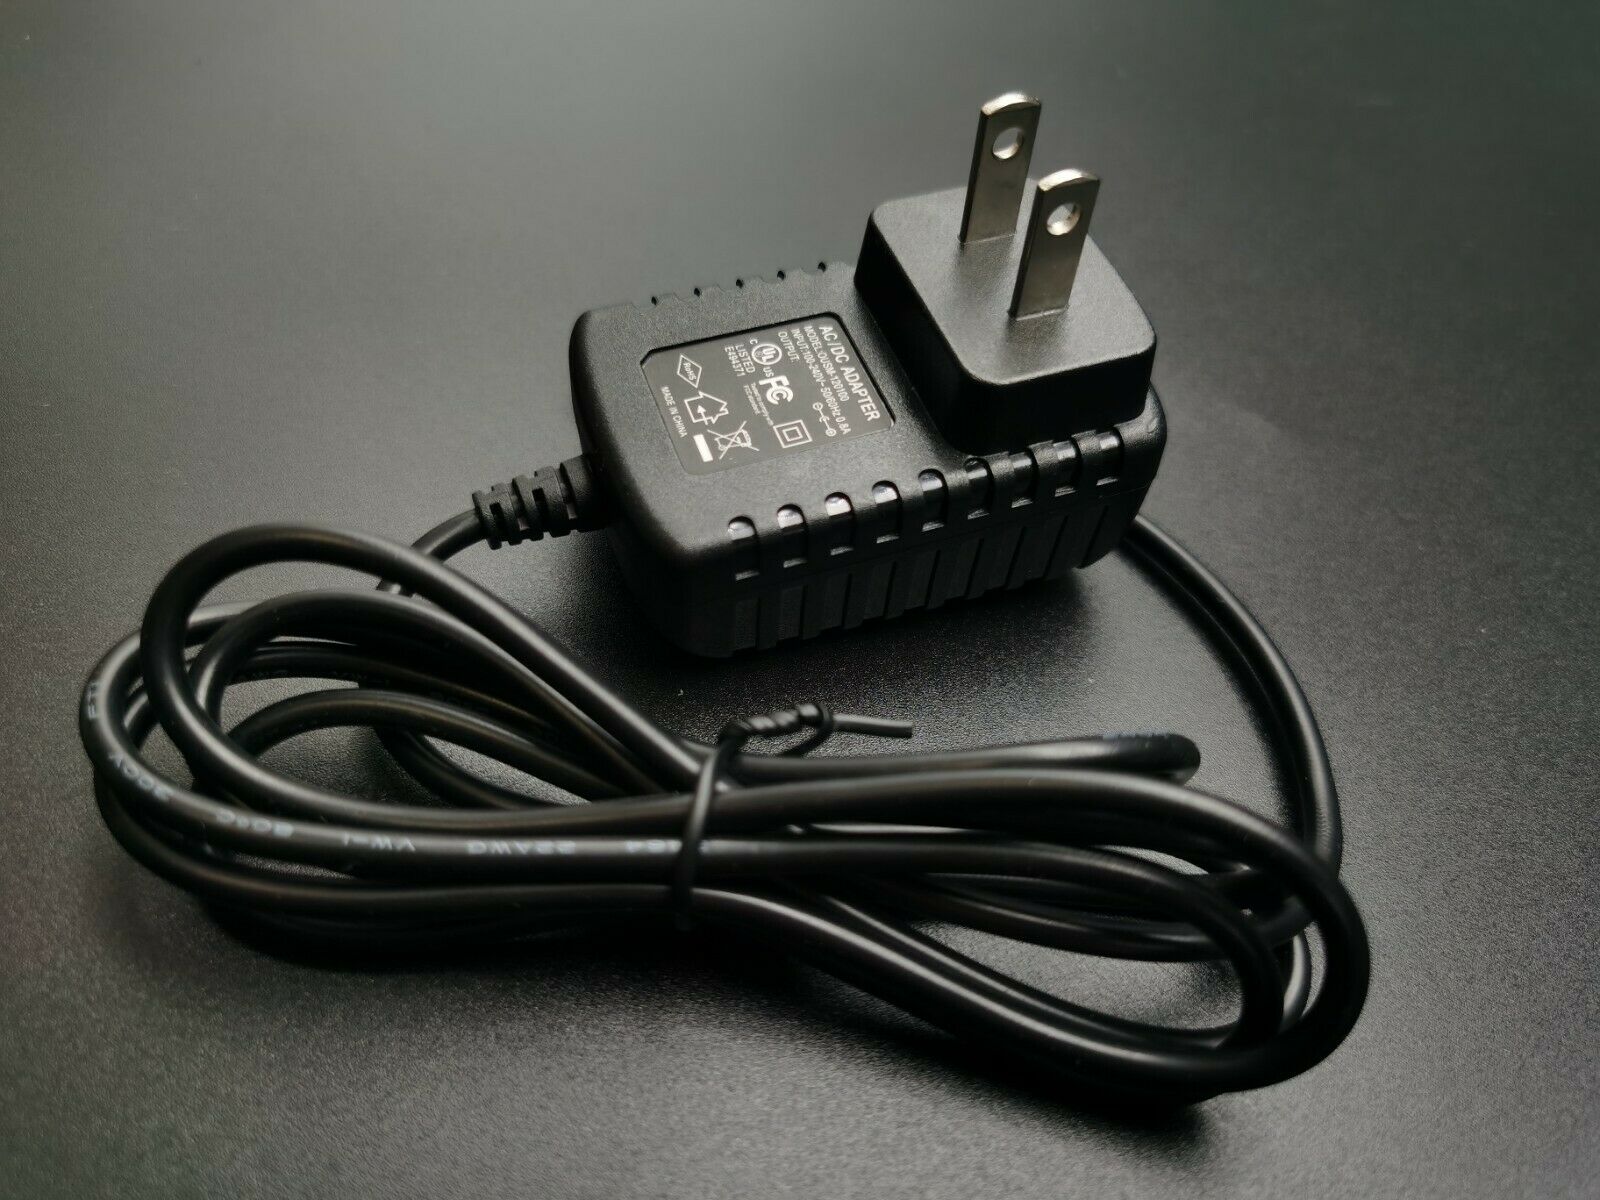 8.6V AC Adapter Charger for SpeedHex FlipOut Rechargeable Power Screwdriver Flip Compatible Brand: For SpeedHex Compa